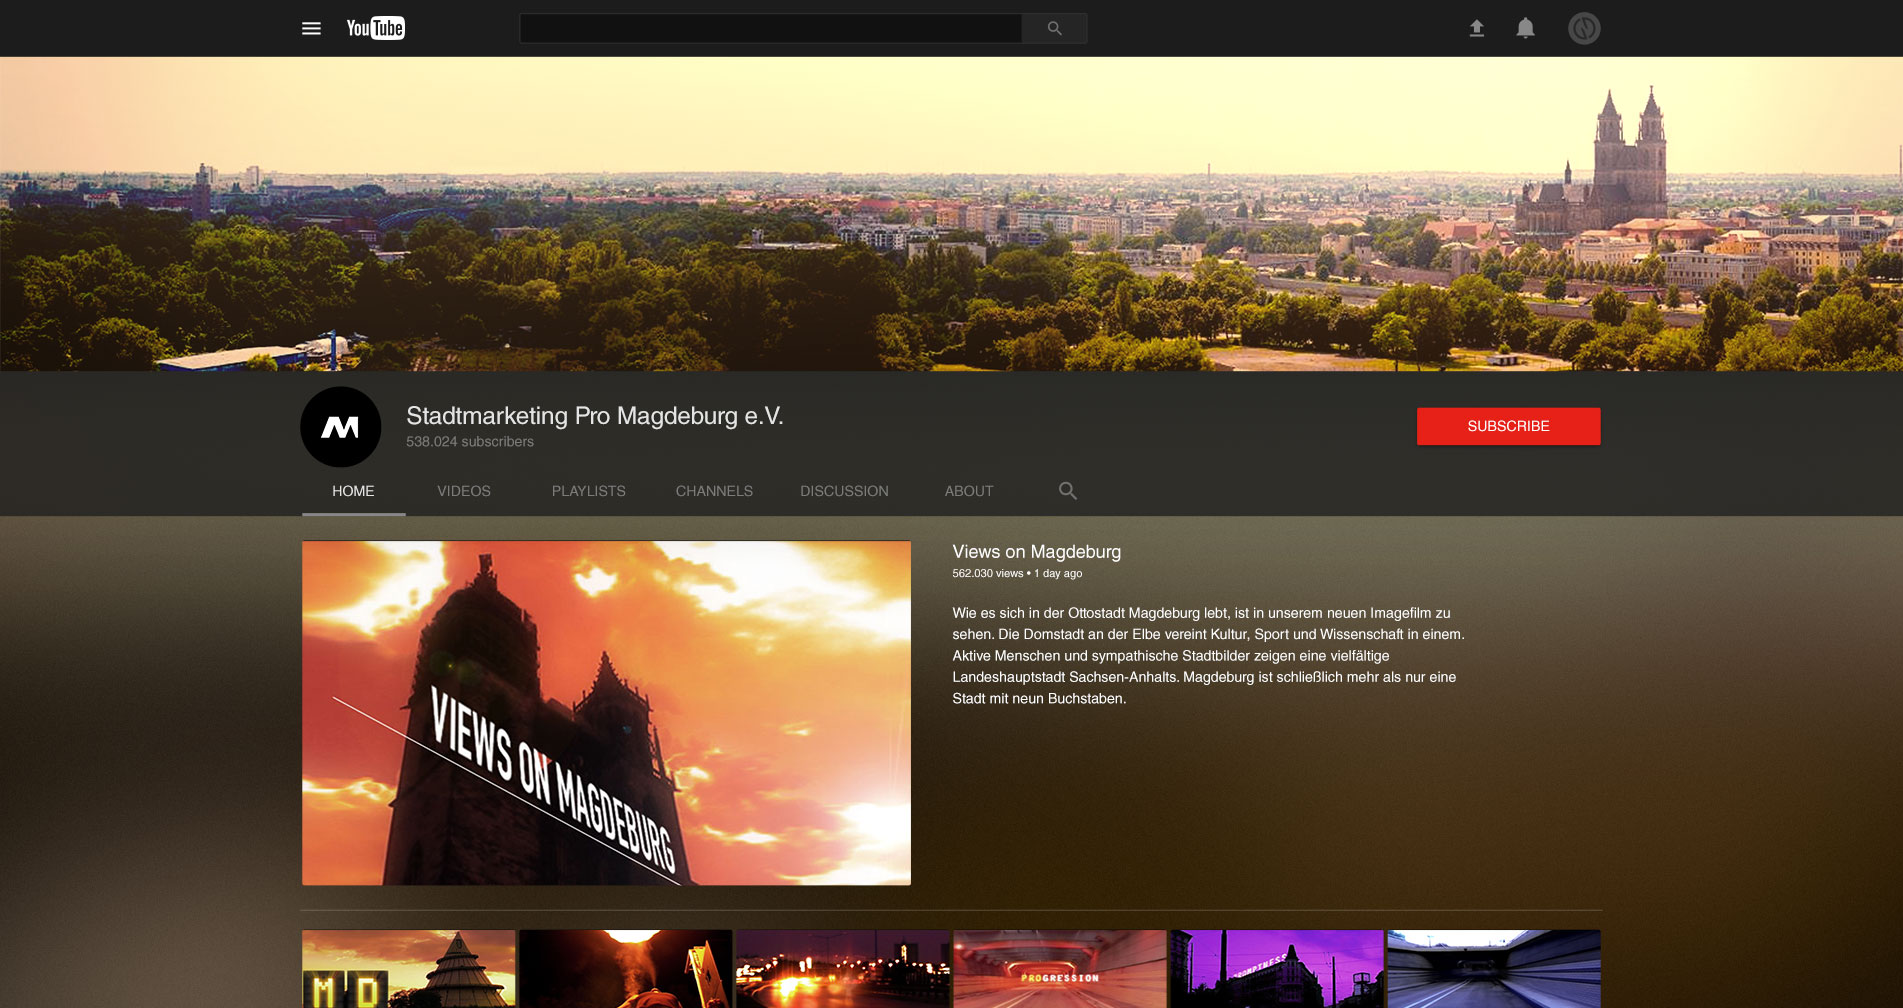 Views on Magdeburg audiovisual campaign